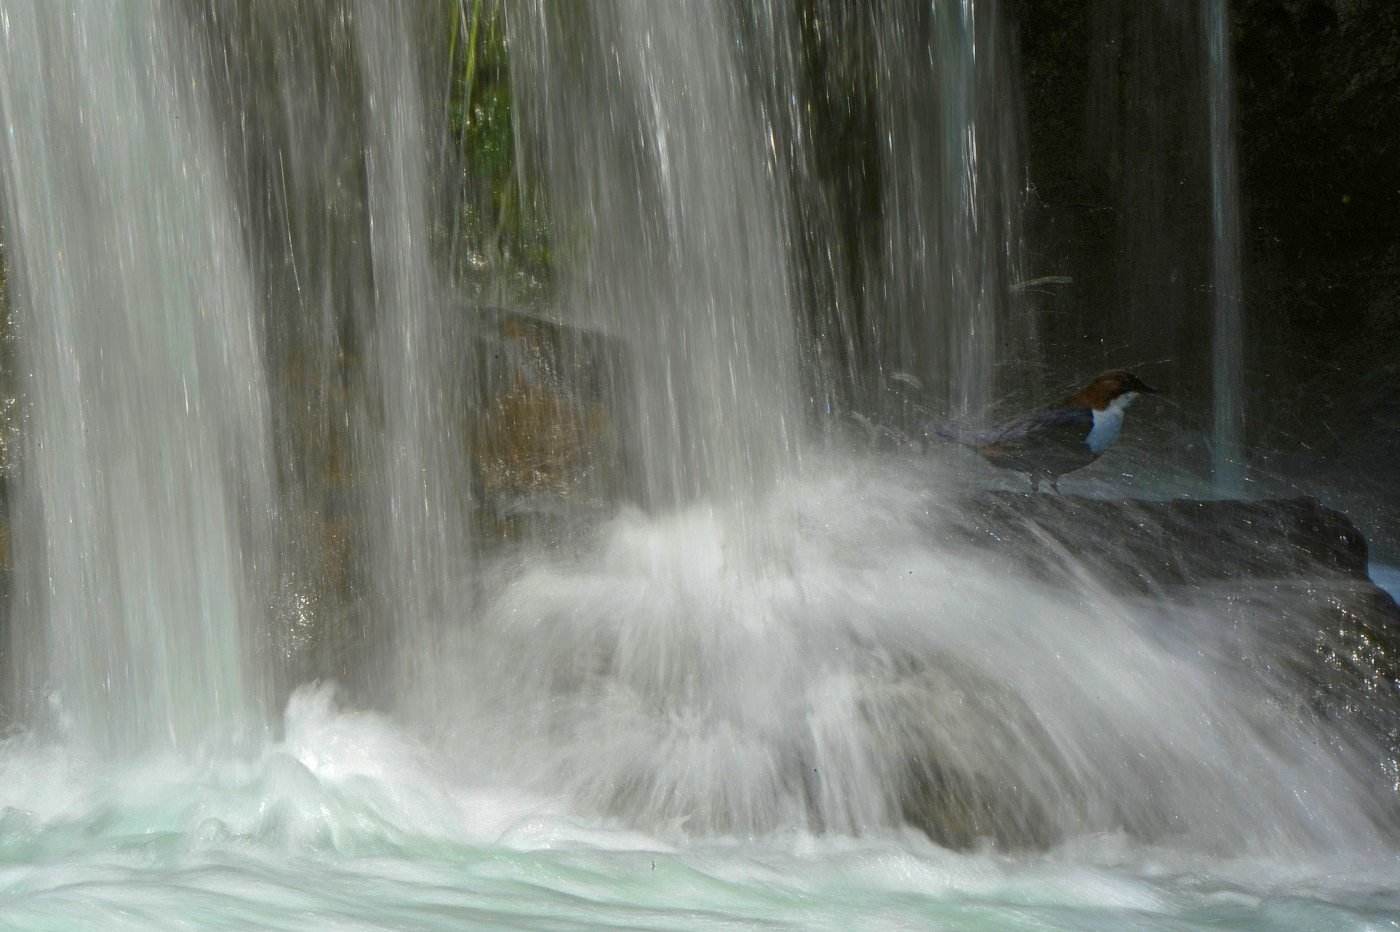 The blackbird and the waterfall...